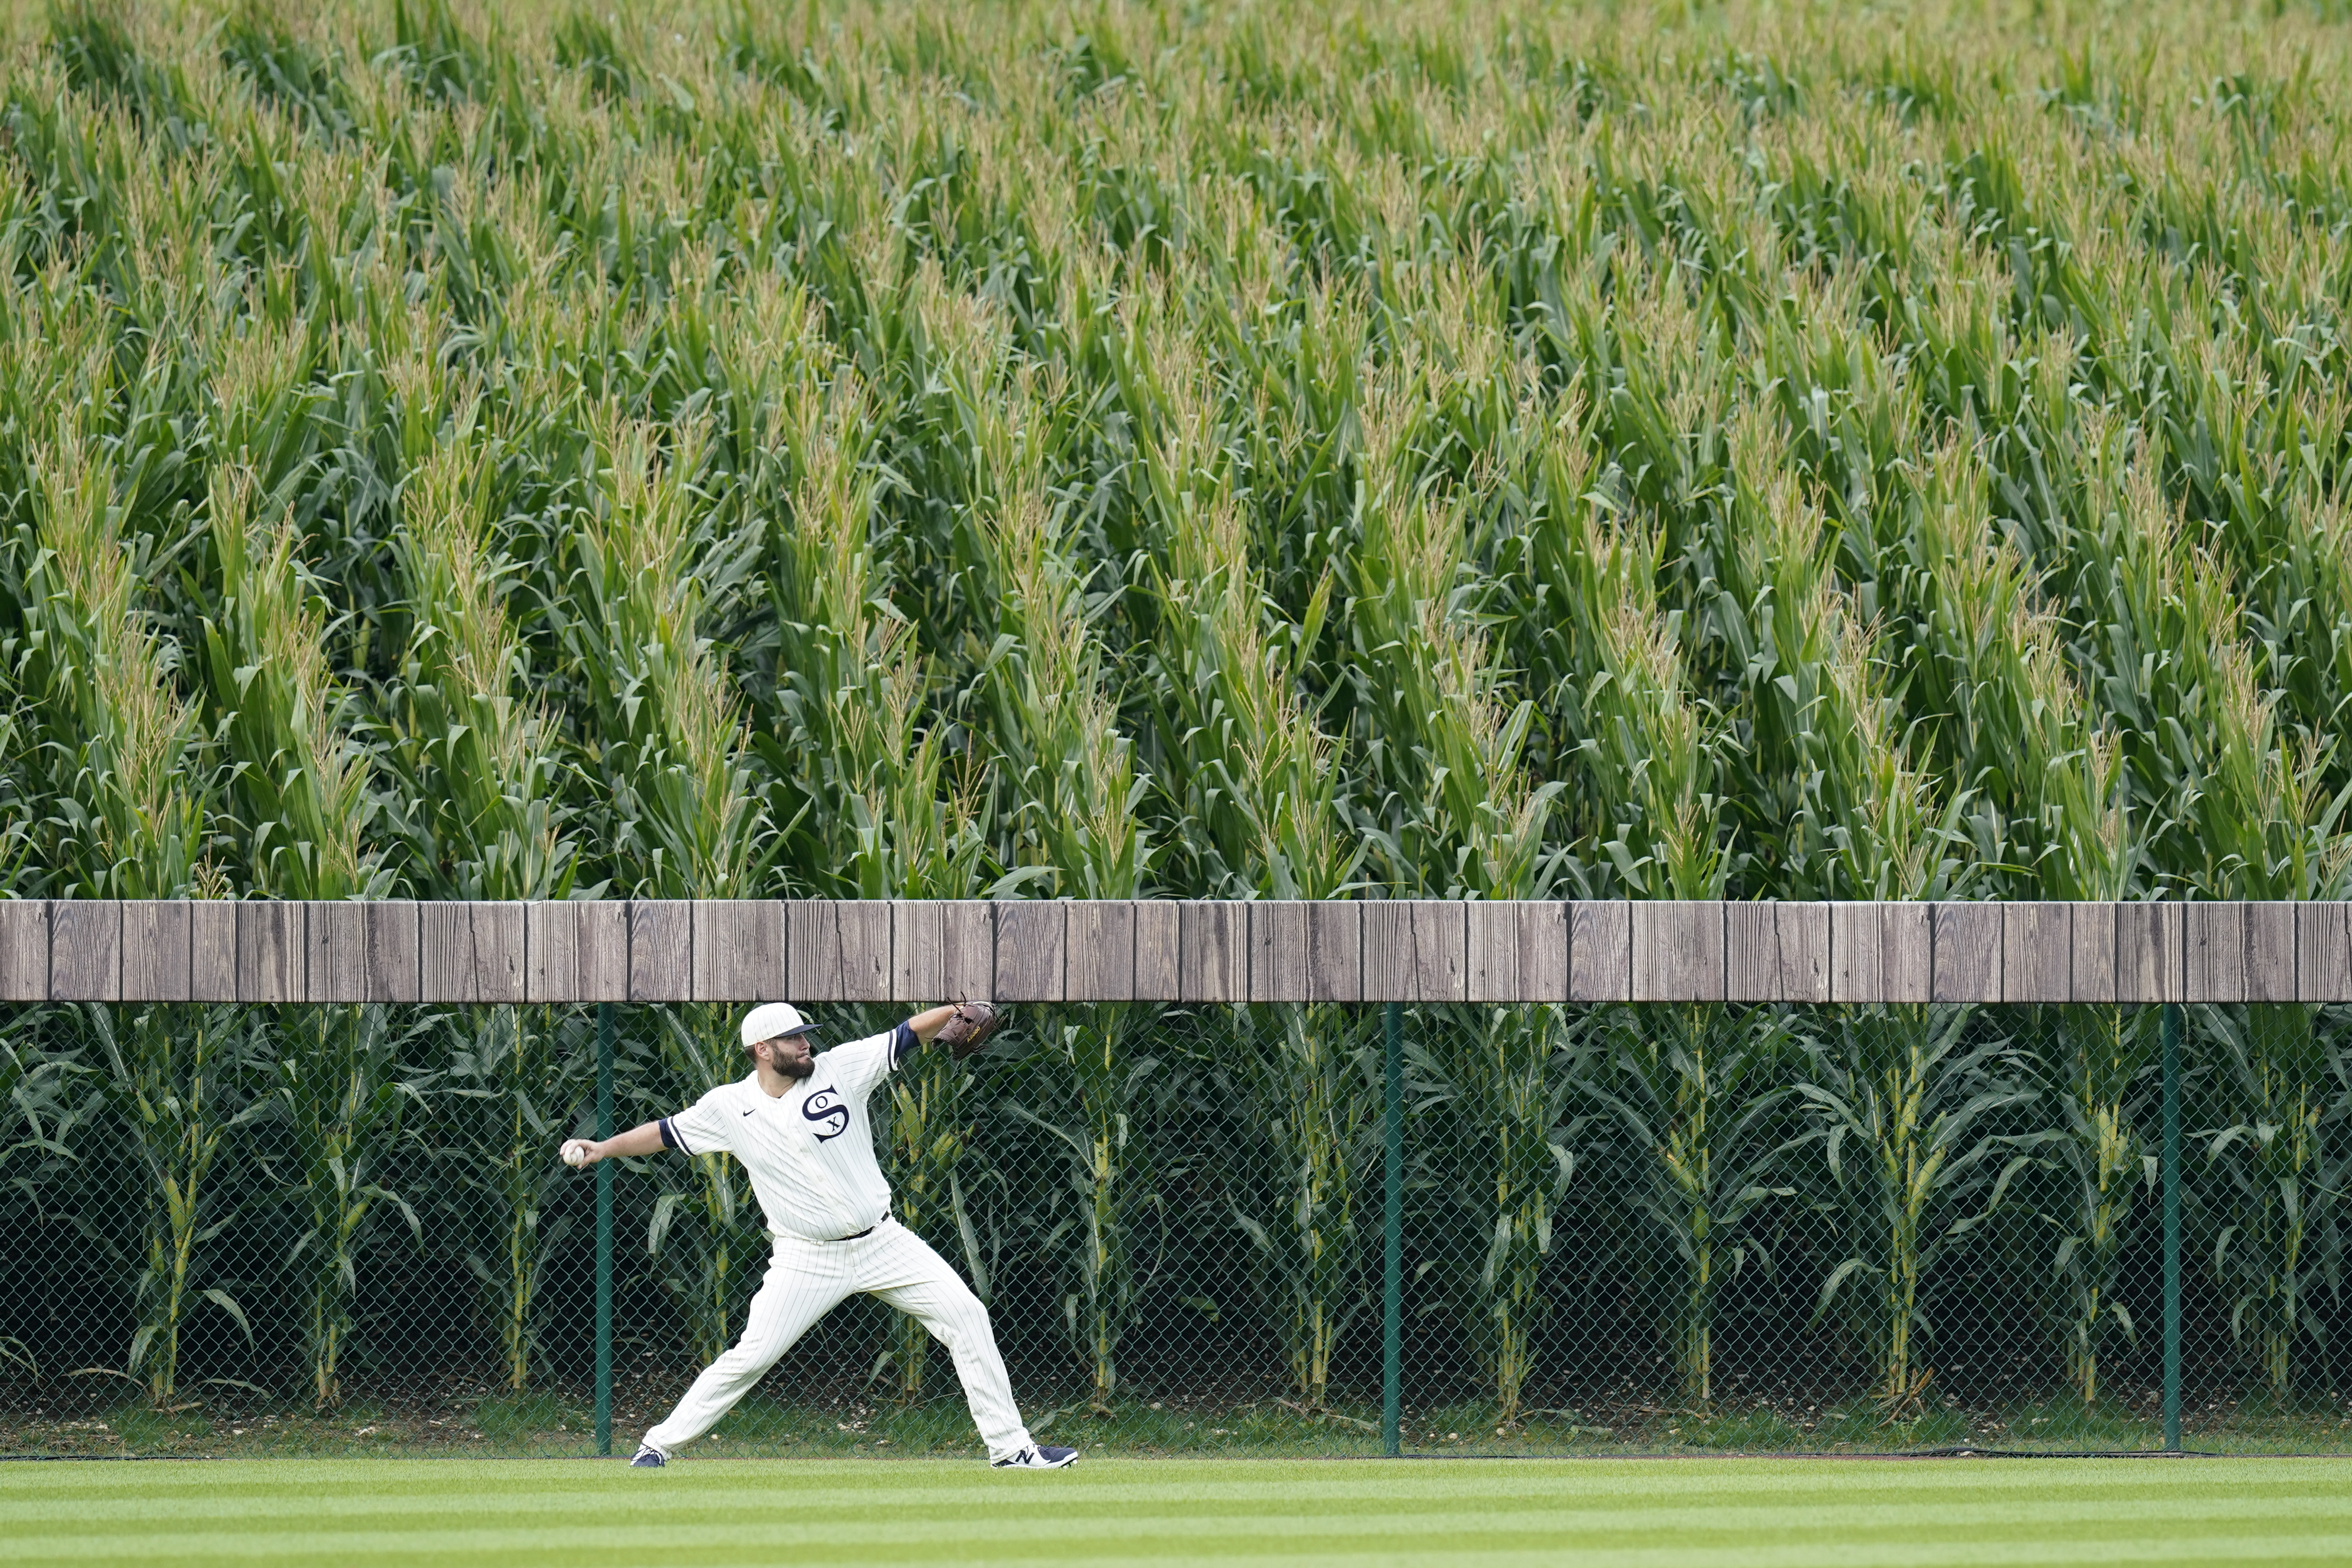 MLB commissioner confirms Field of Dreams game will return in 2022   Dubuque  kwwlcom